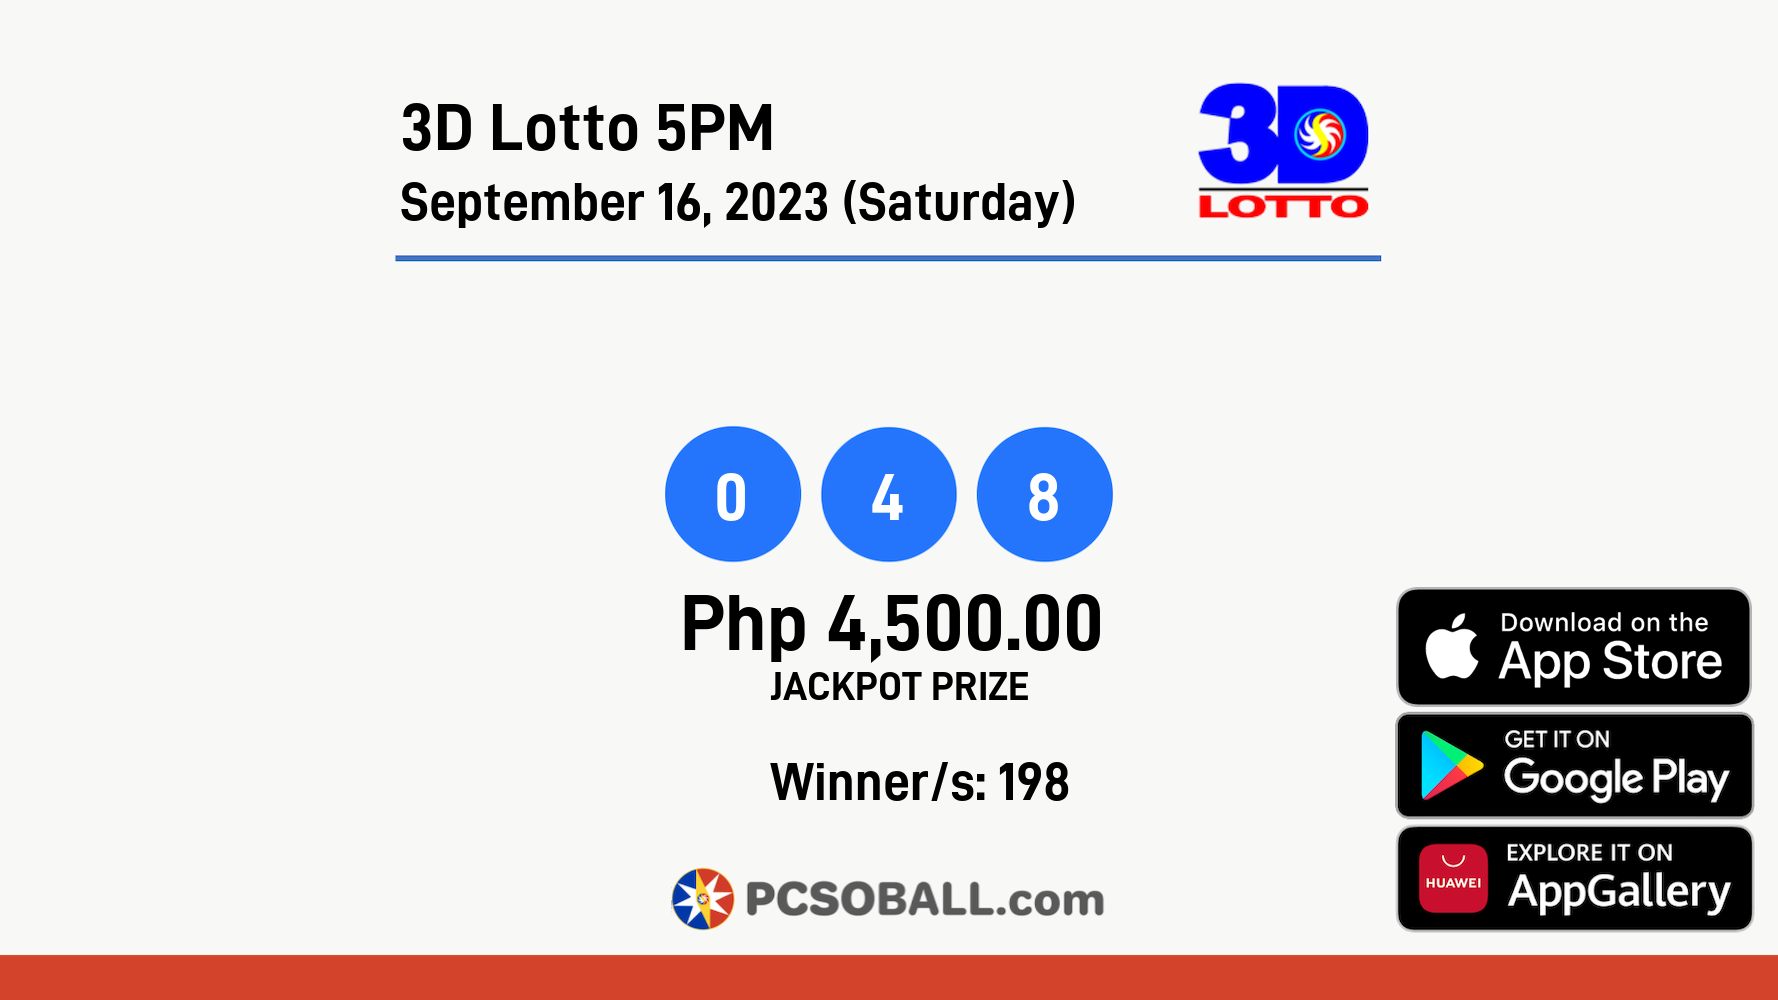 3D Lotto 5PM September 16, 2023 (Saturday) Result